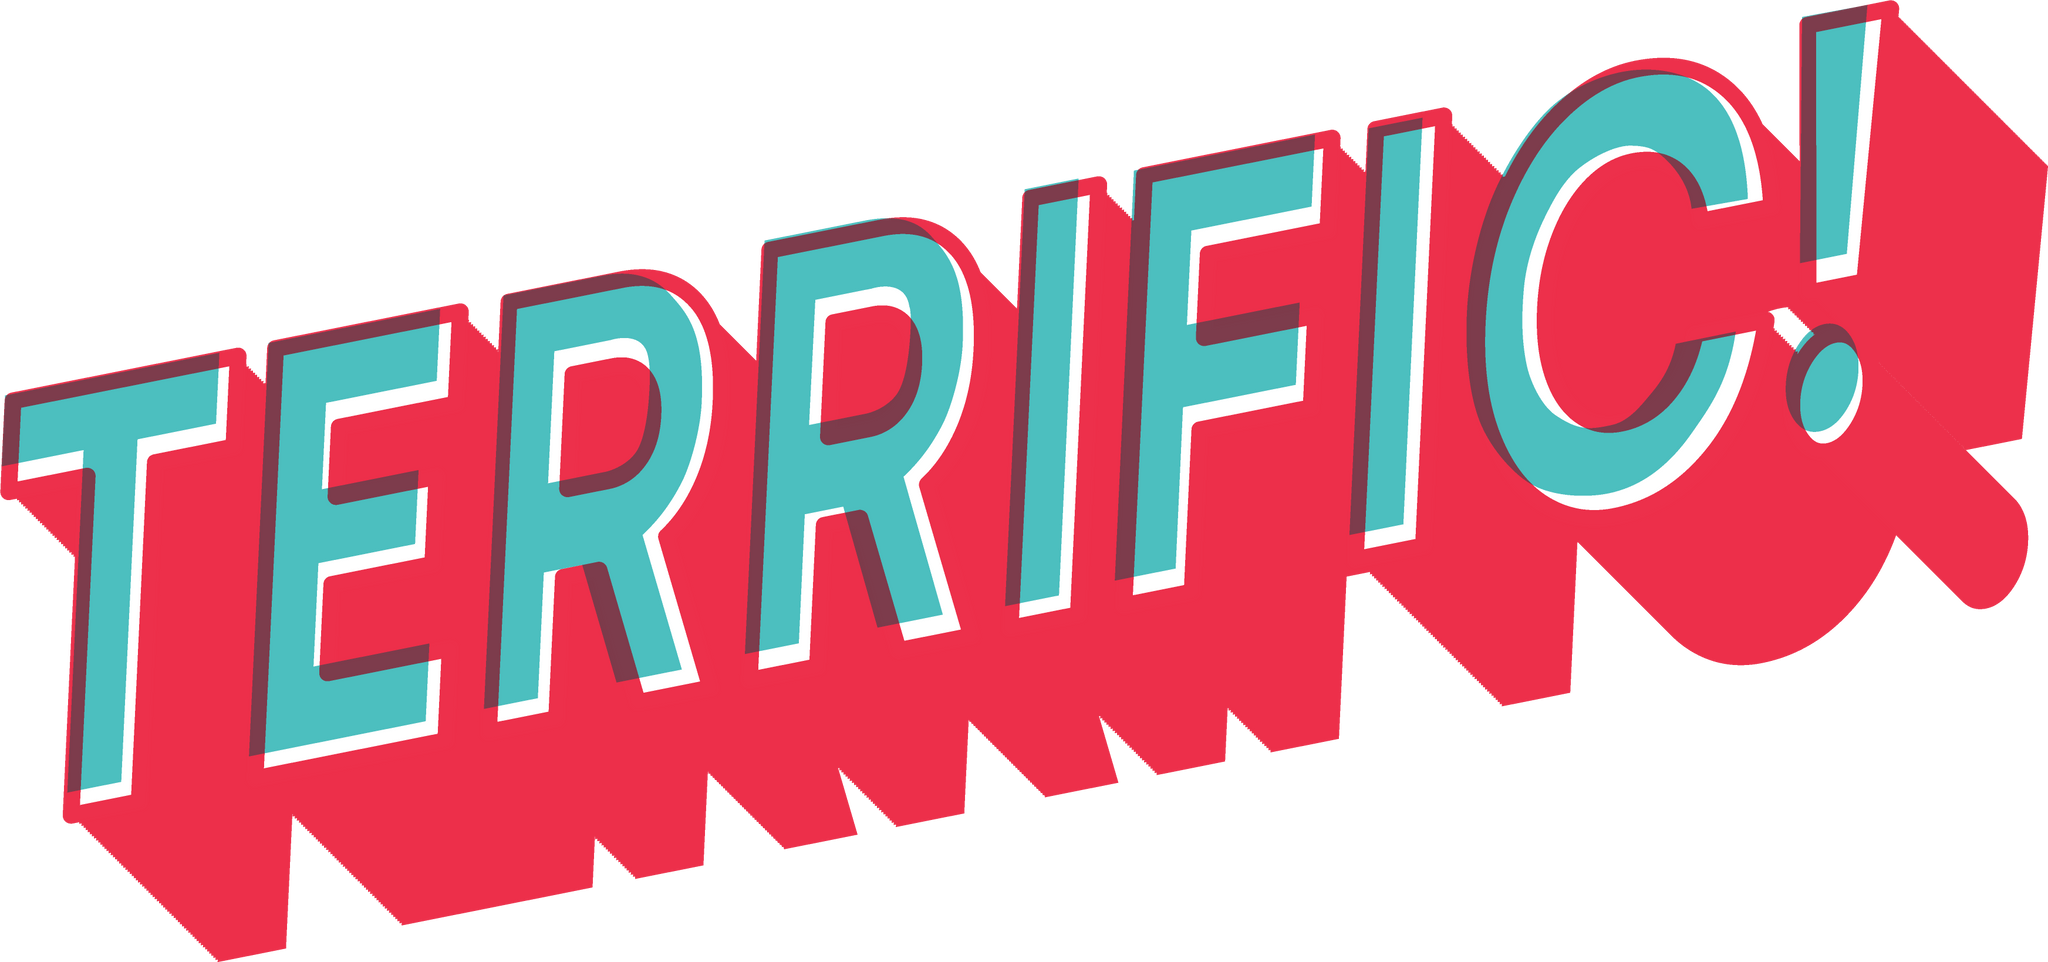 the word Terrific! in teal with a block red outline